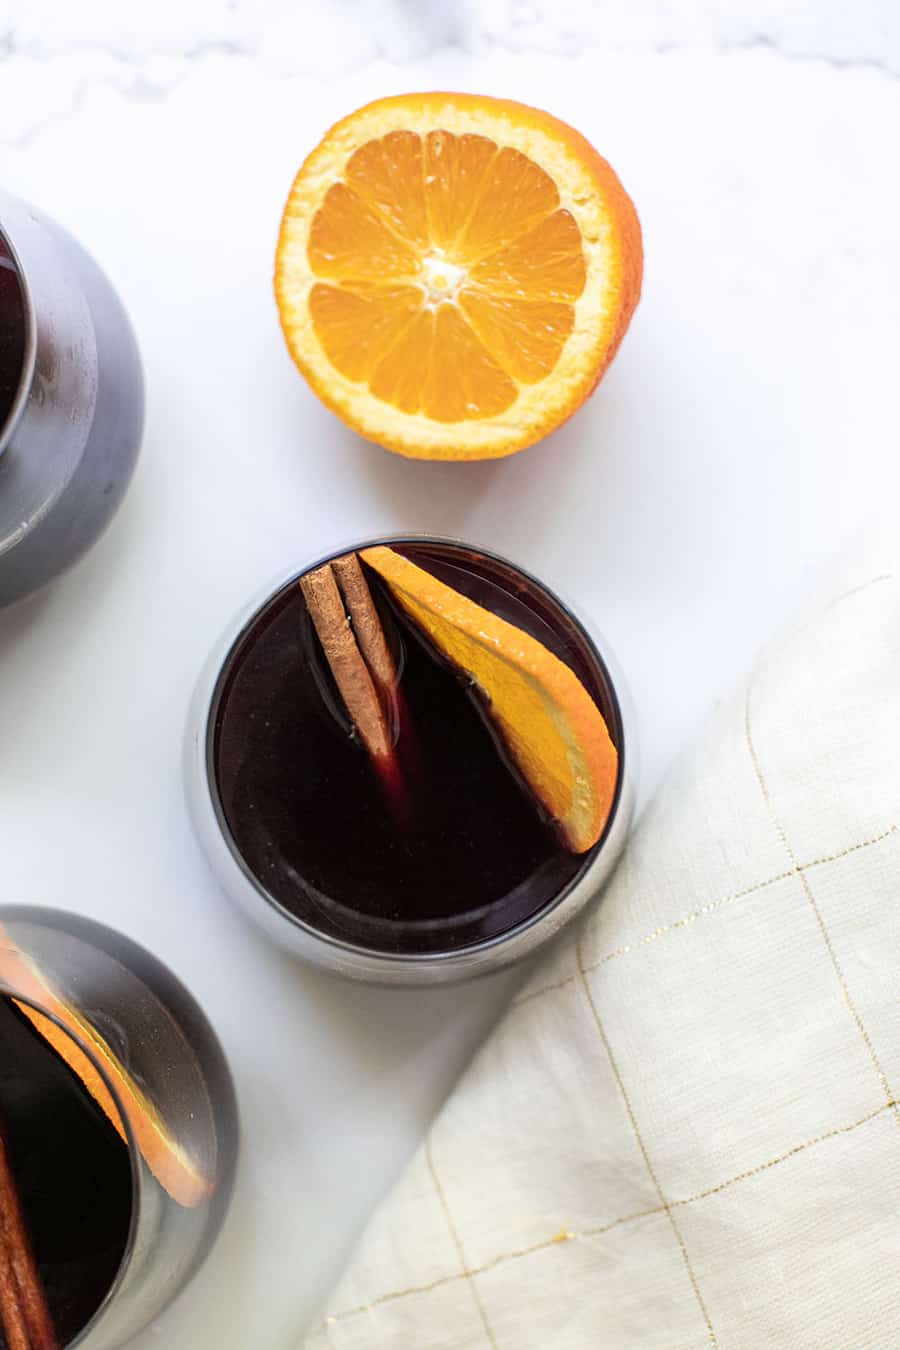 Mulled wine with an orange slice and cinnamon stick